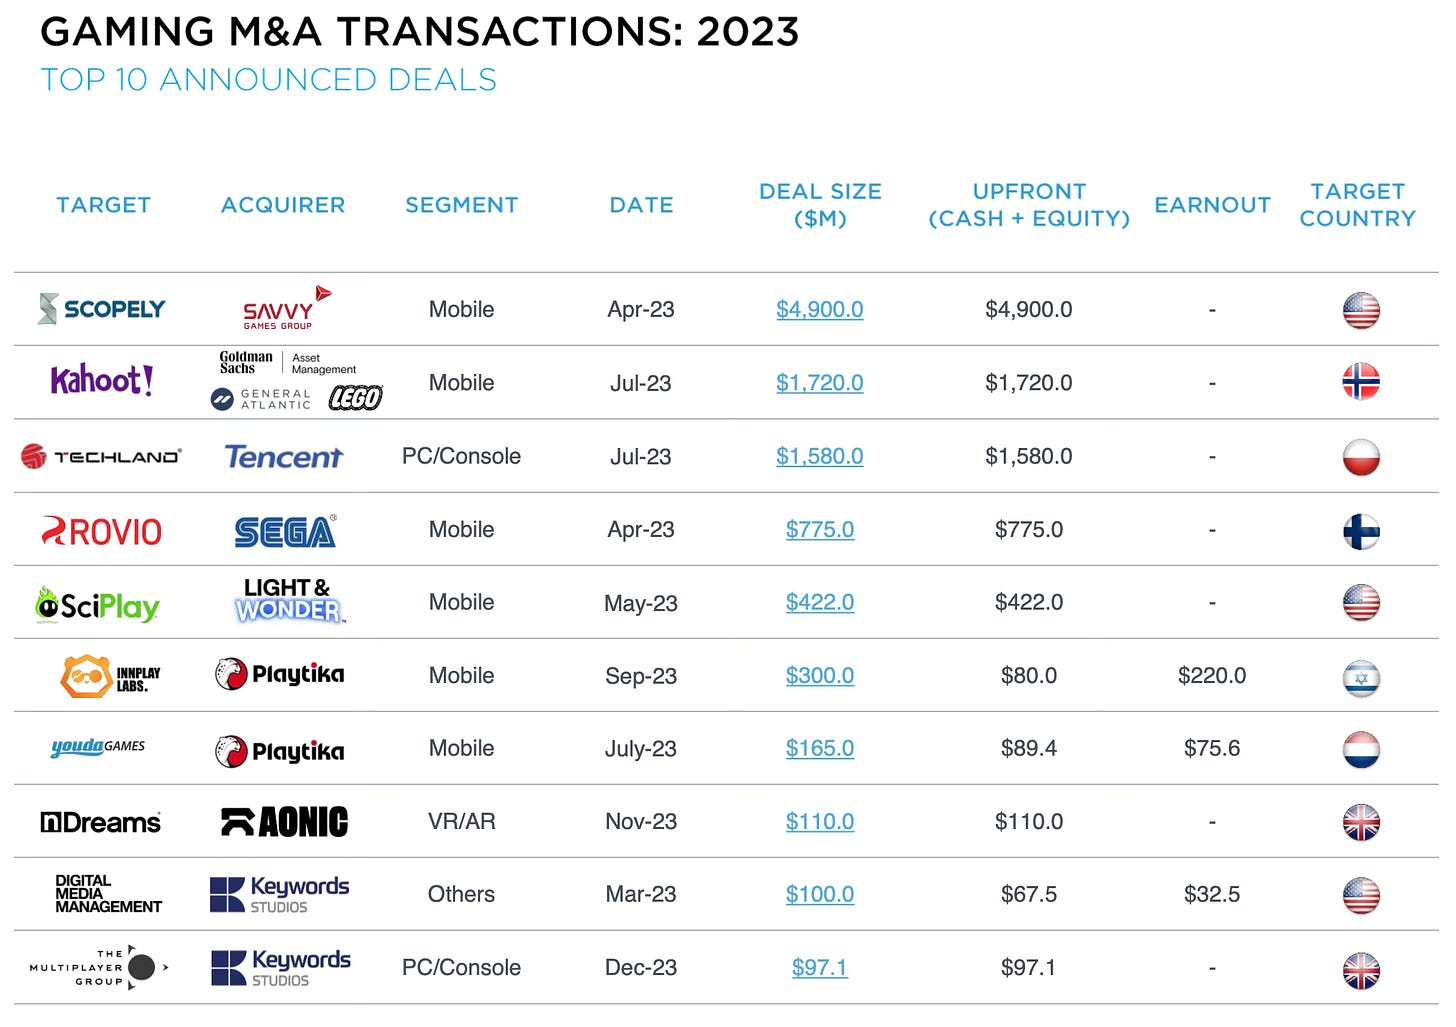 Gaming M&A Transactions 2023